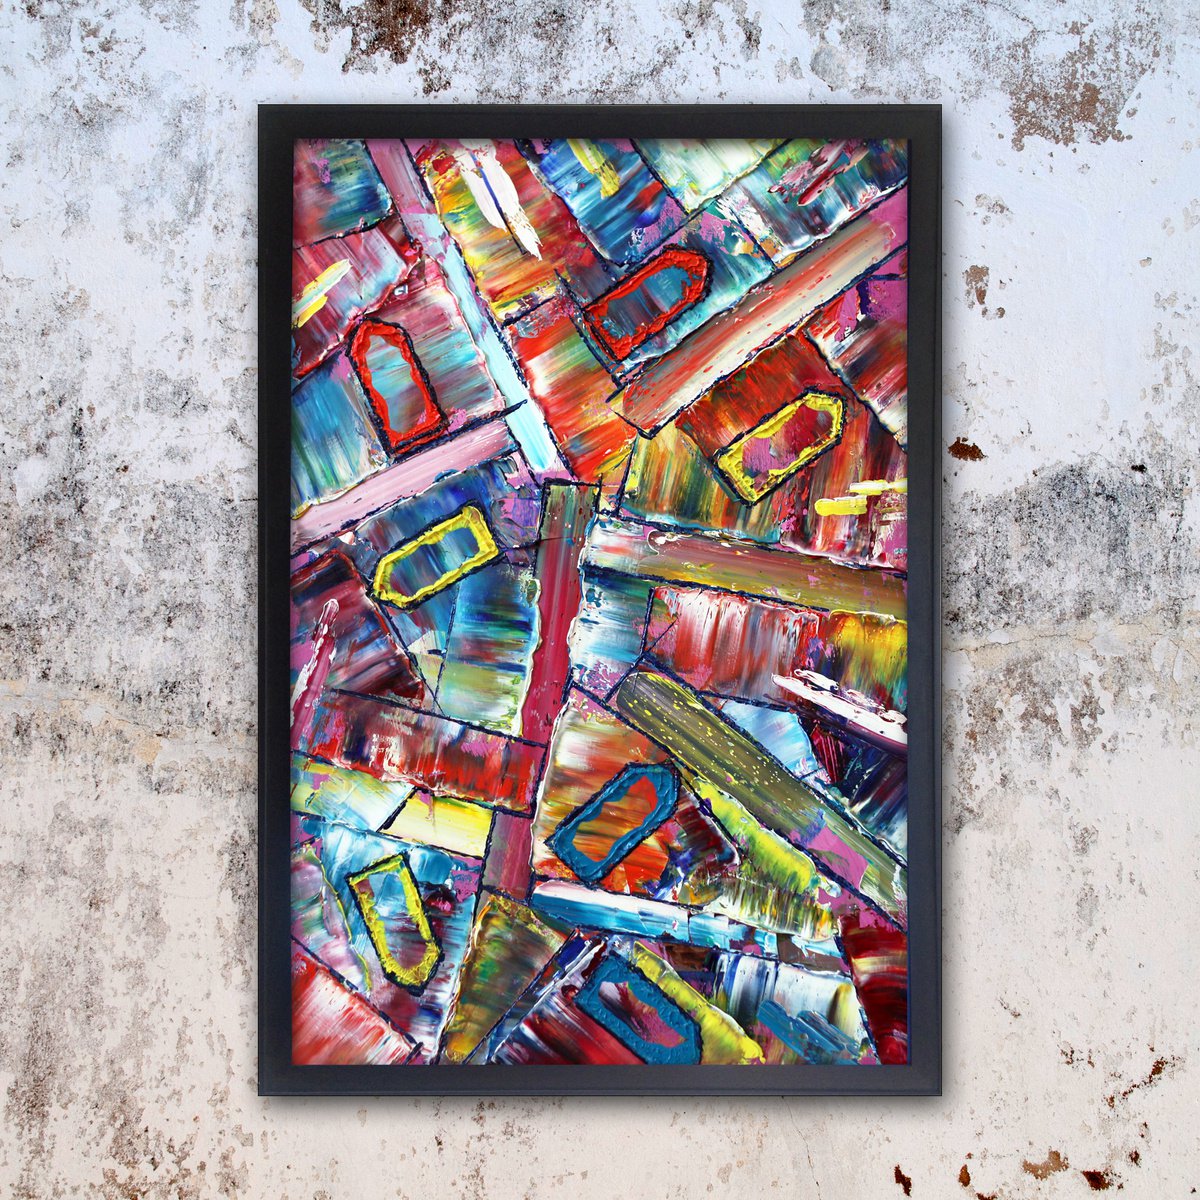 Drive-Thru Nation - Original Highly Textured PMS Abstract Oil Painting On Wood - 26 x 3... by Preston M. Smith (PMS)